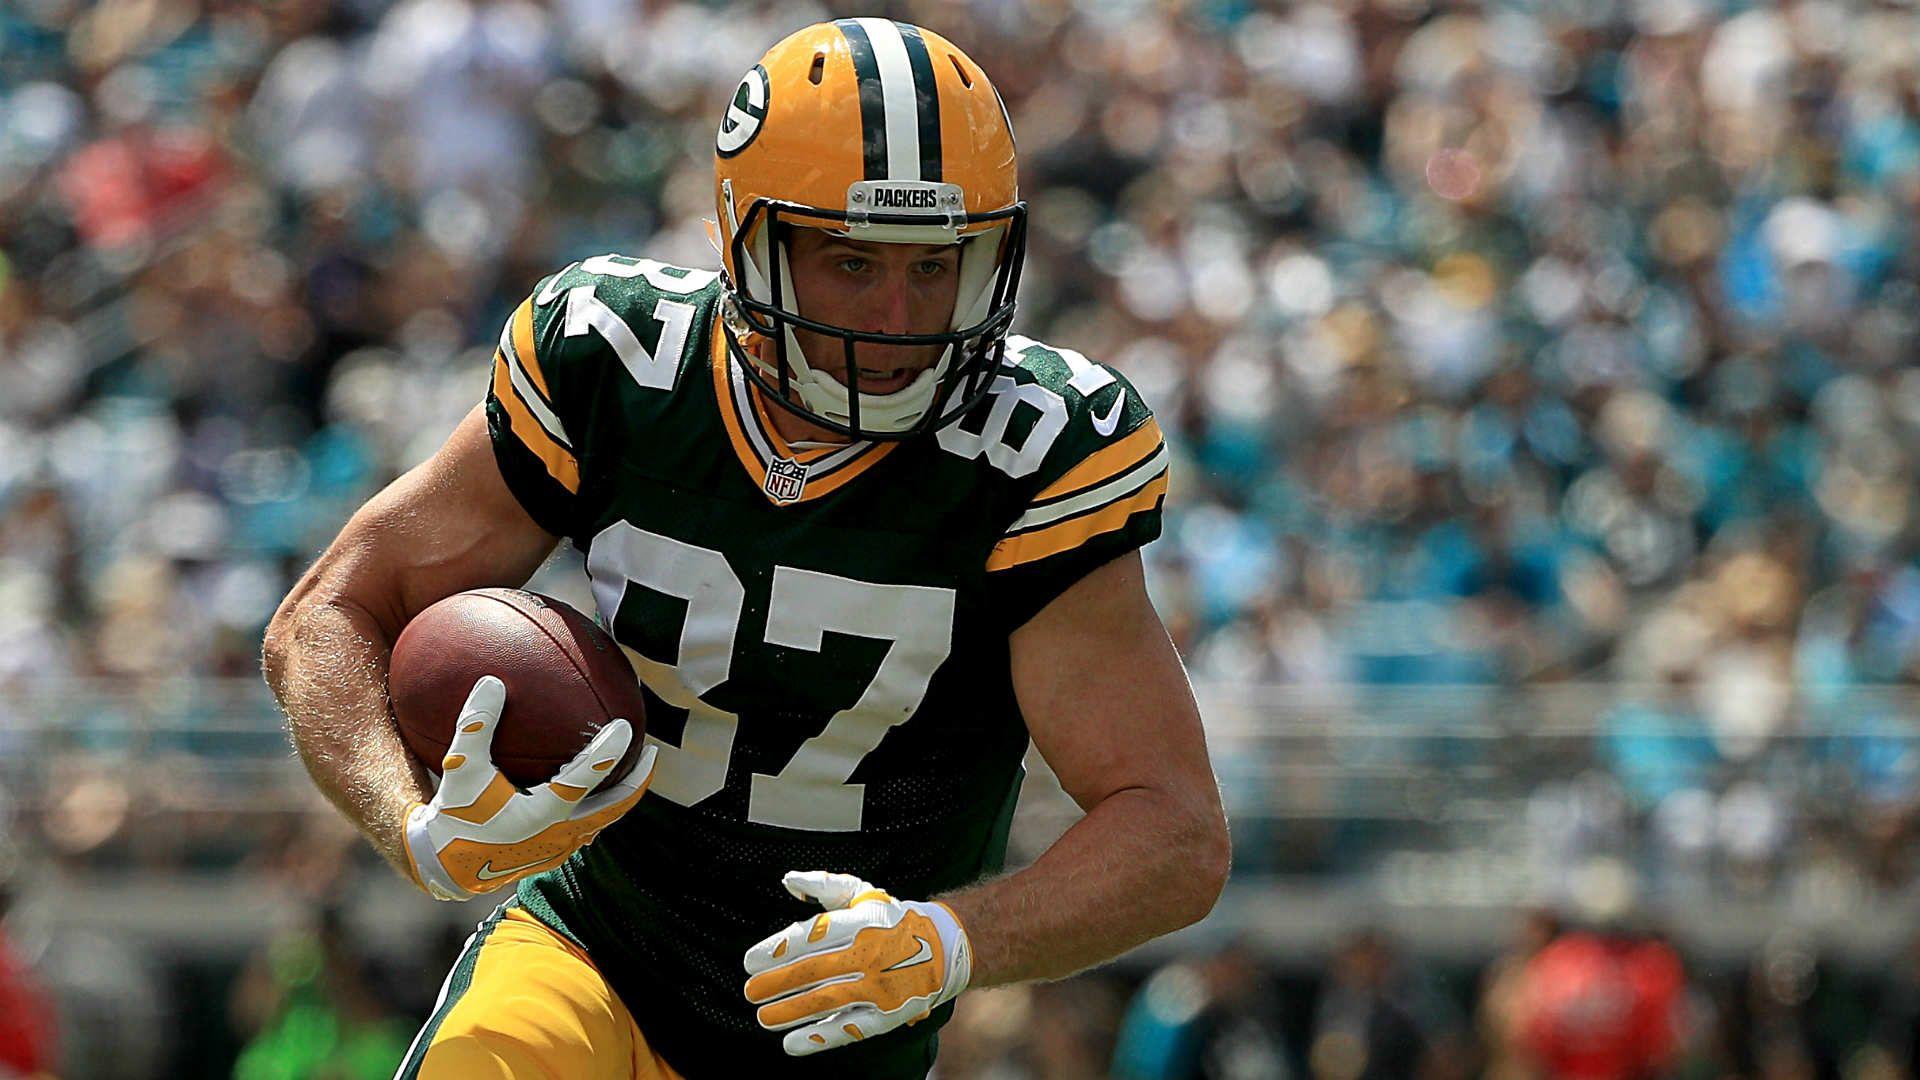 Jordy Nelson returns to help Packers beat Jaguars.